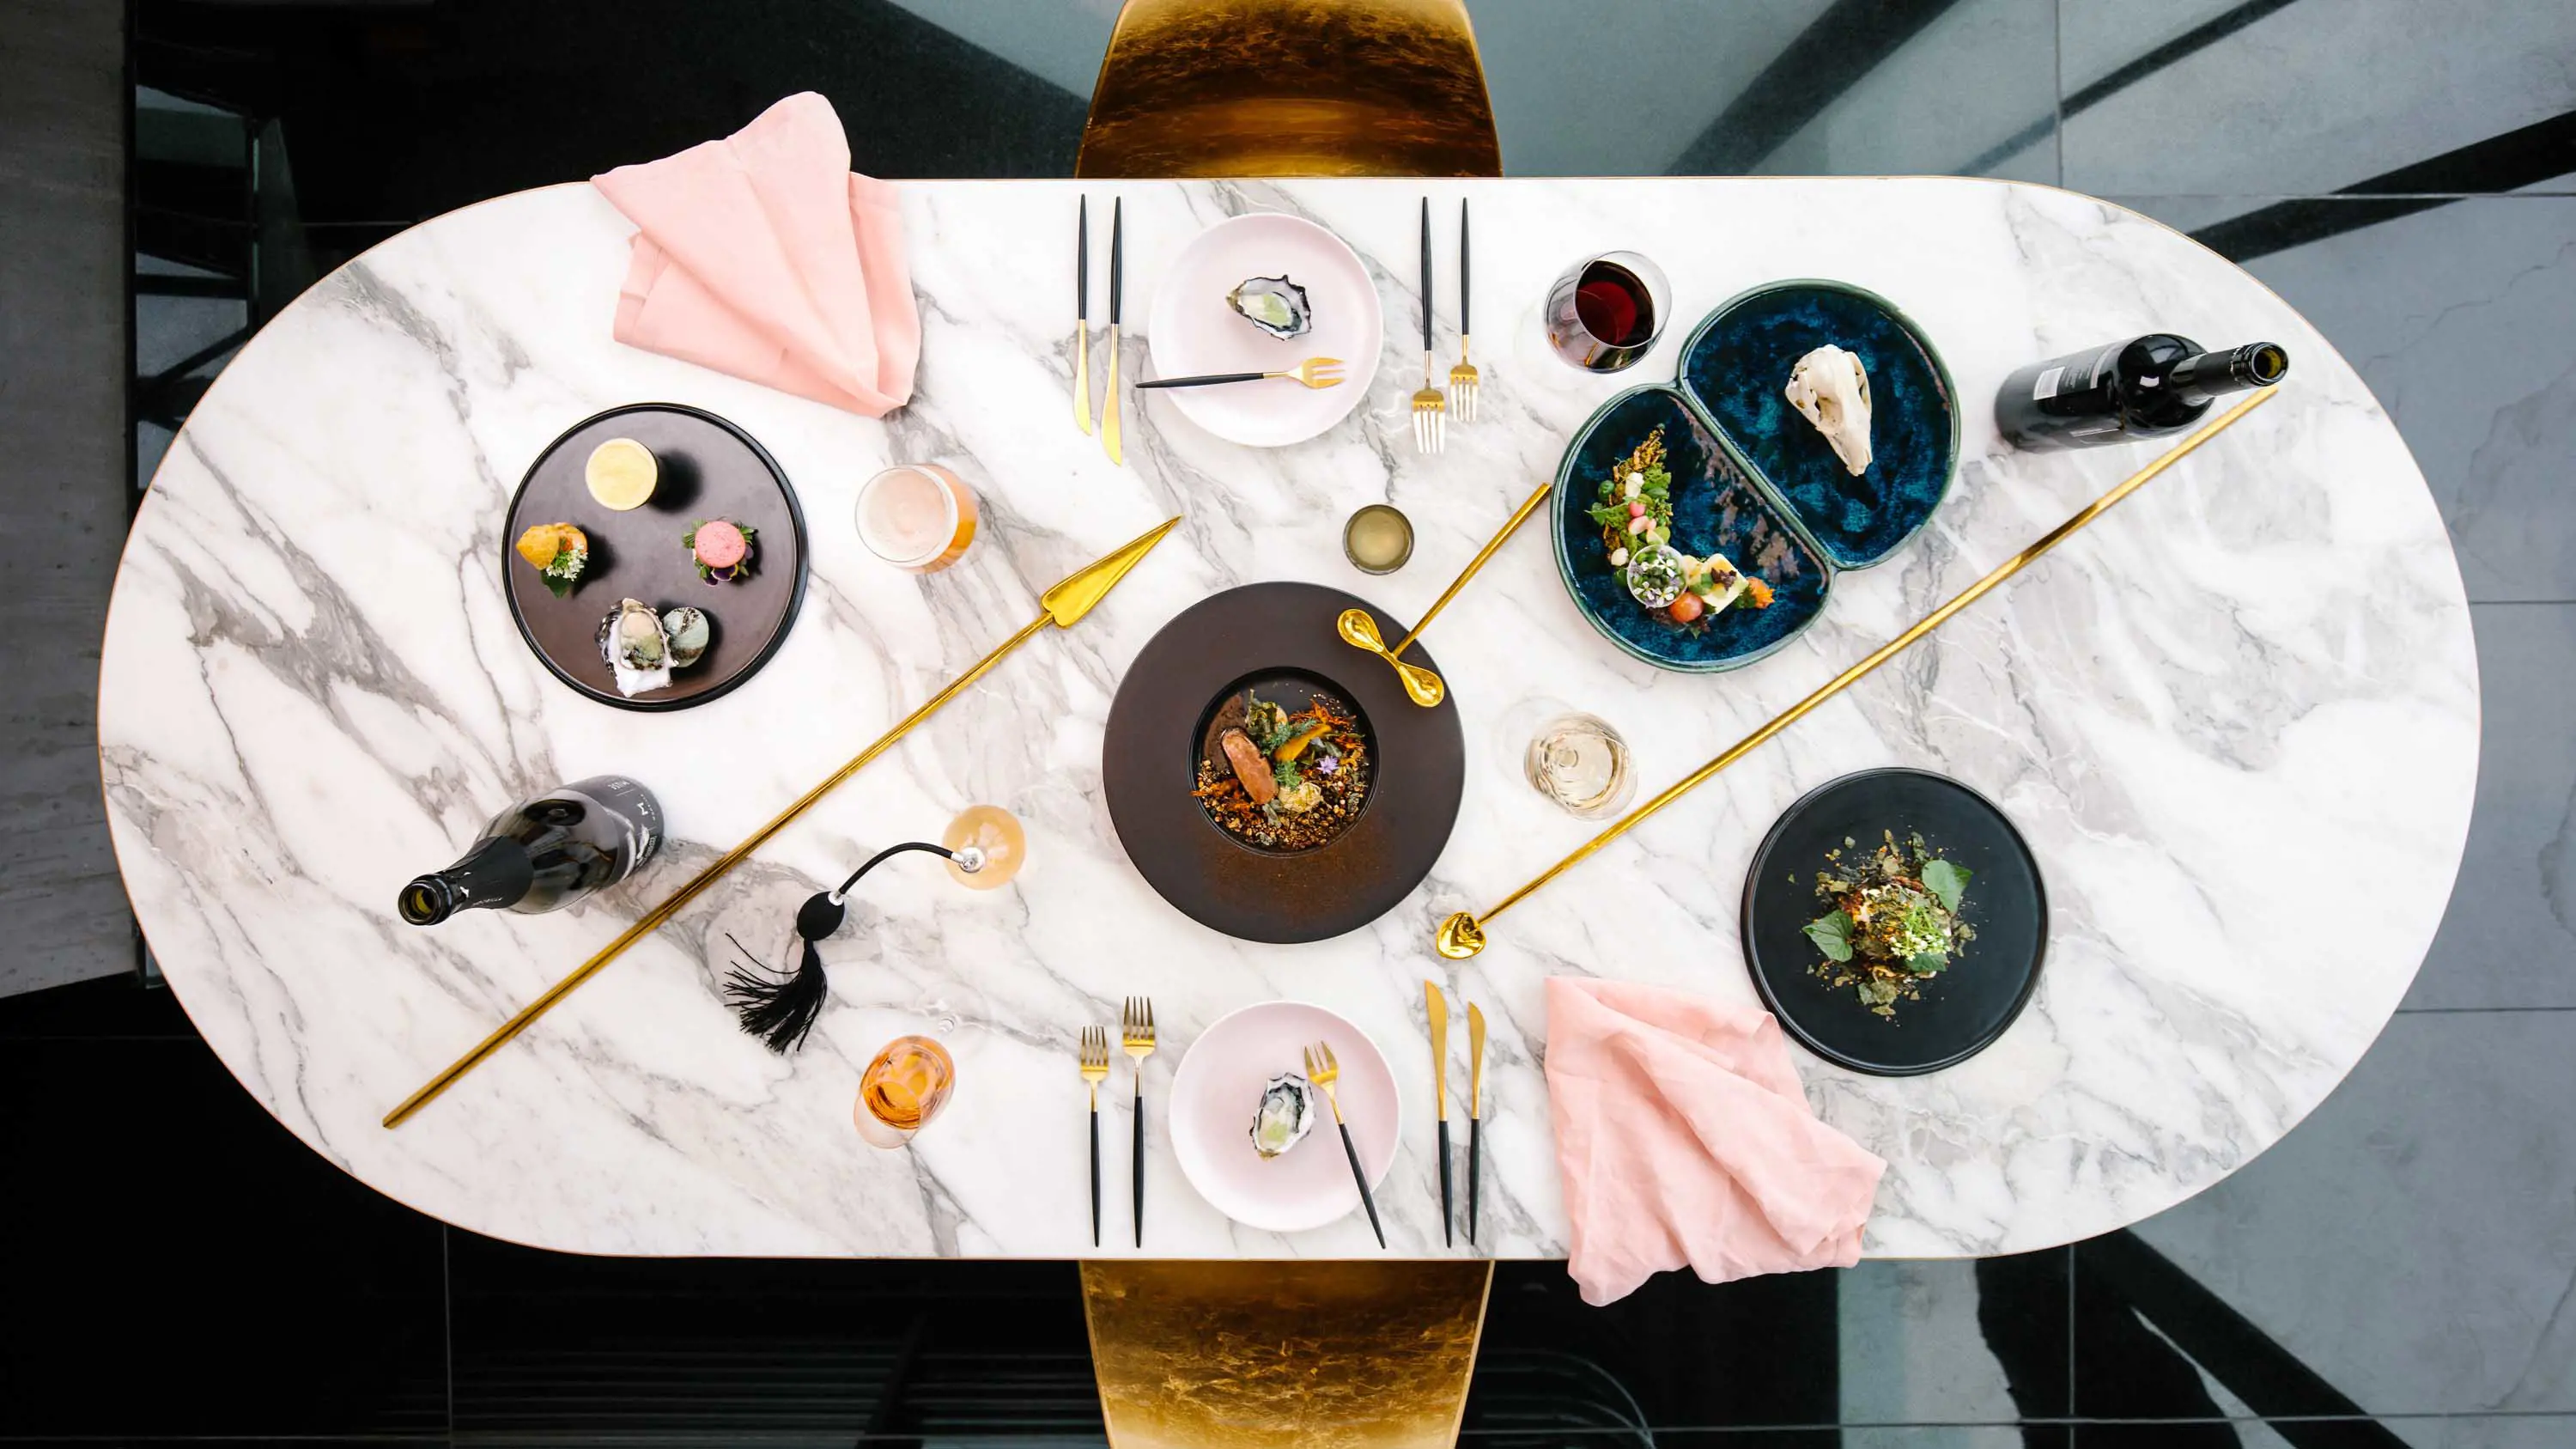 A top-down view of fine-dining cuisine presented on small plates with gold cutlery and pink fabric serviettes arranged on a marble table top.